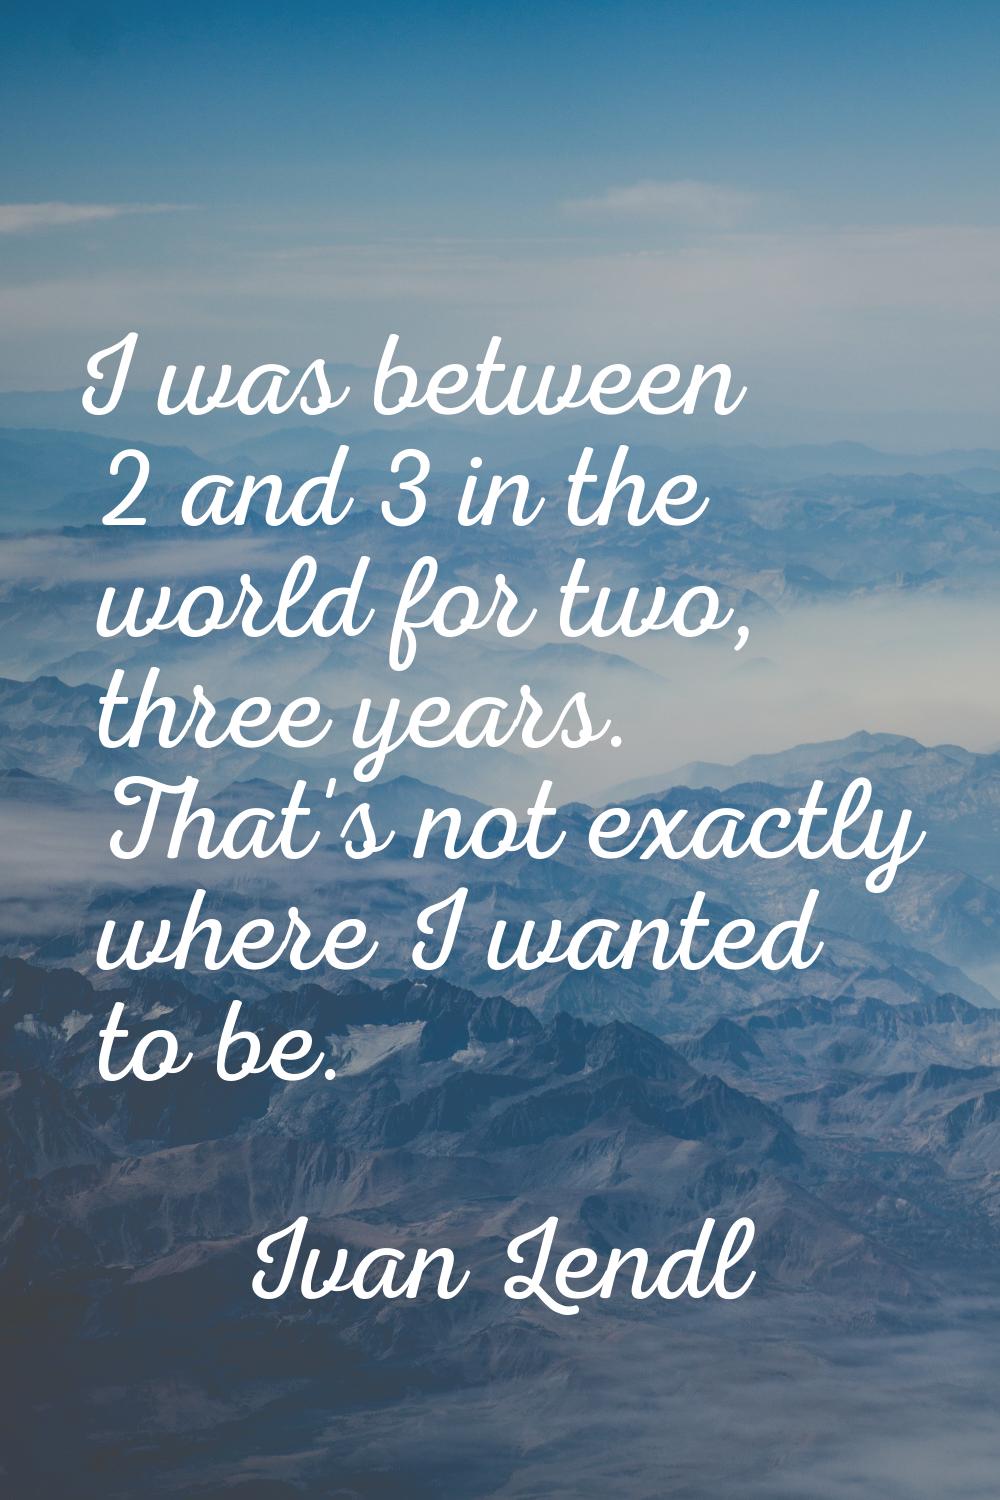 I was between 2 and 3 in the world for two, three years. That's not exactly where I wanted to be.